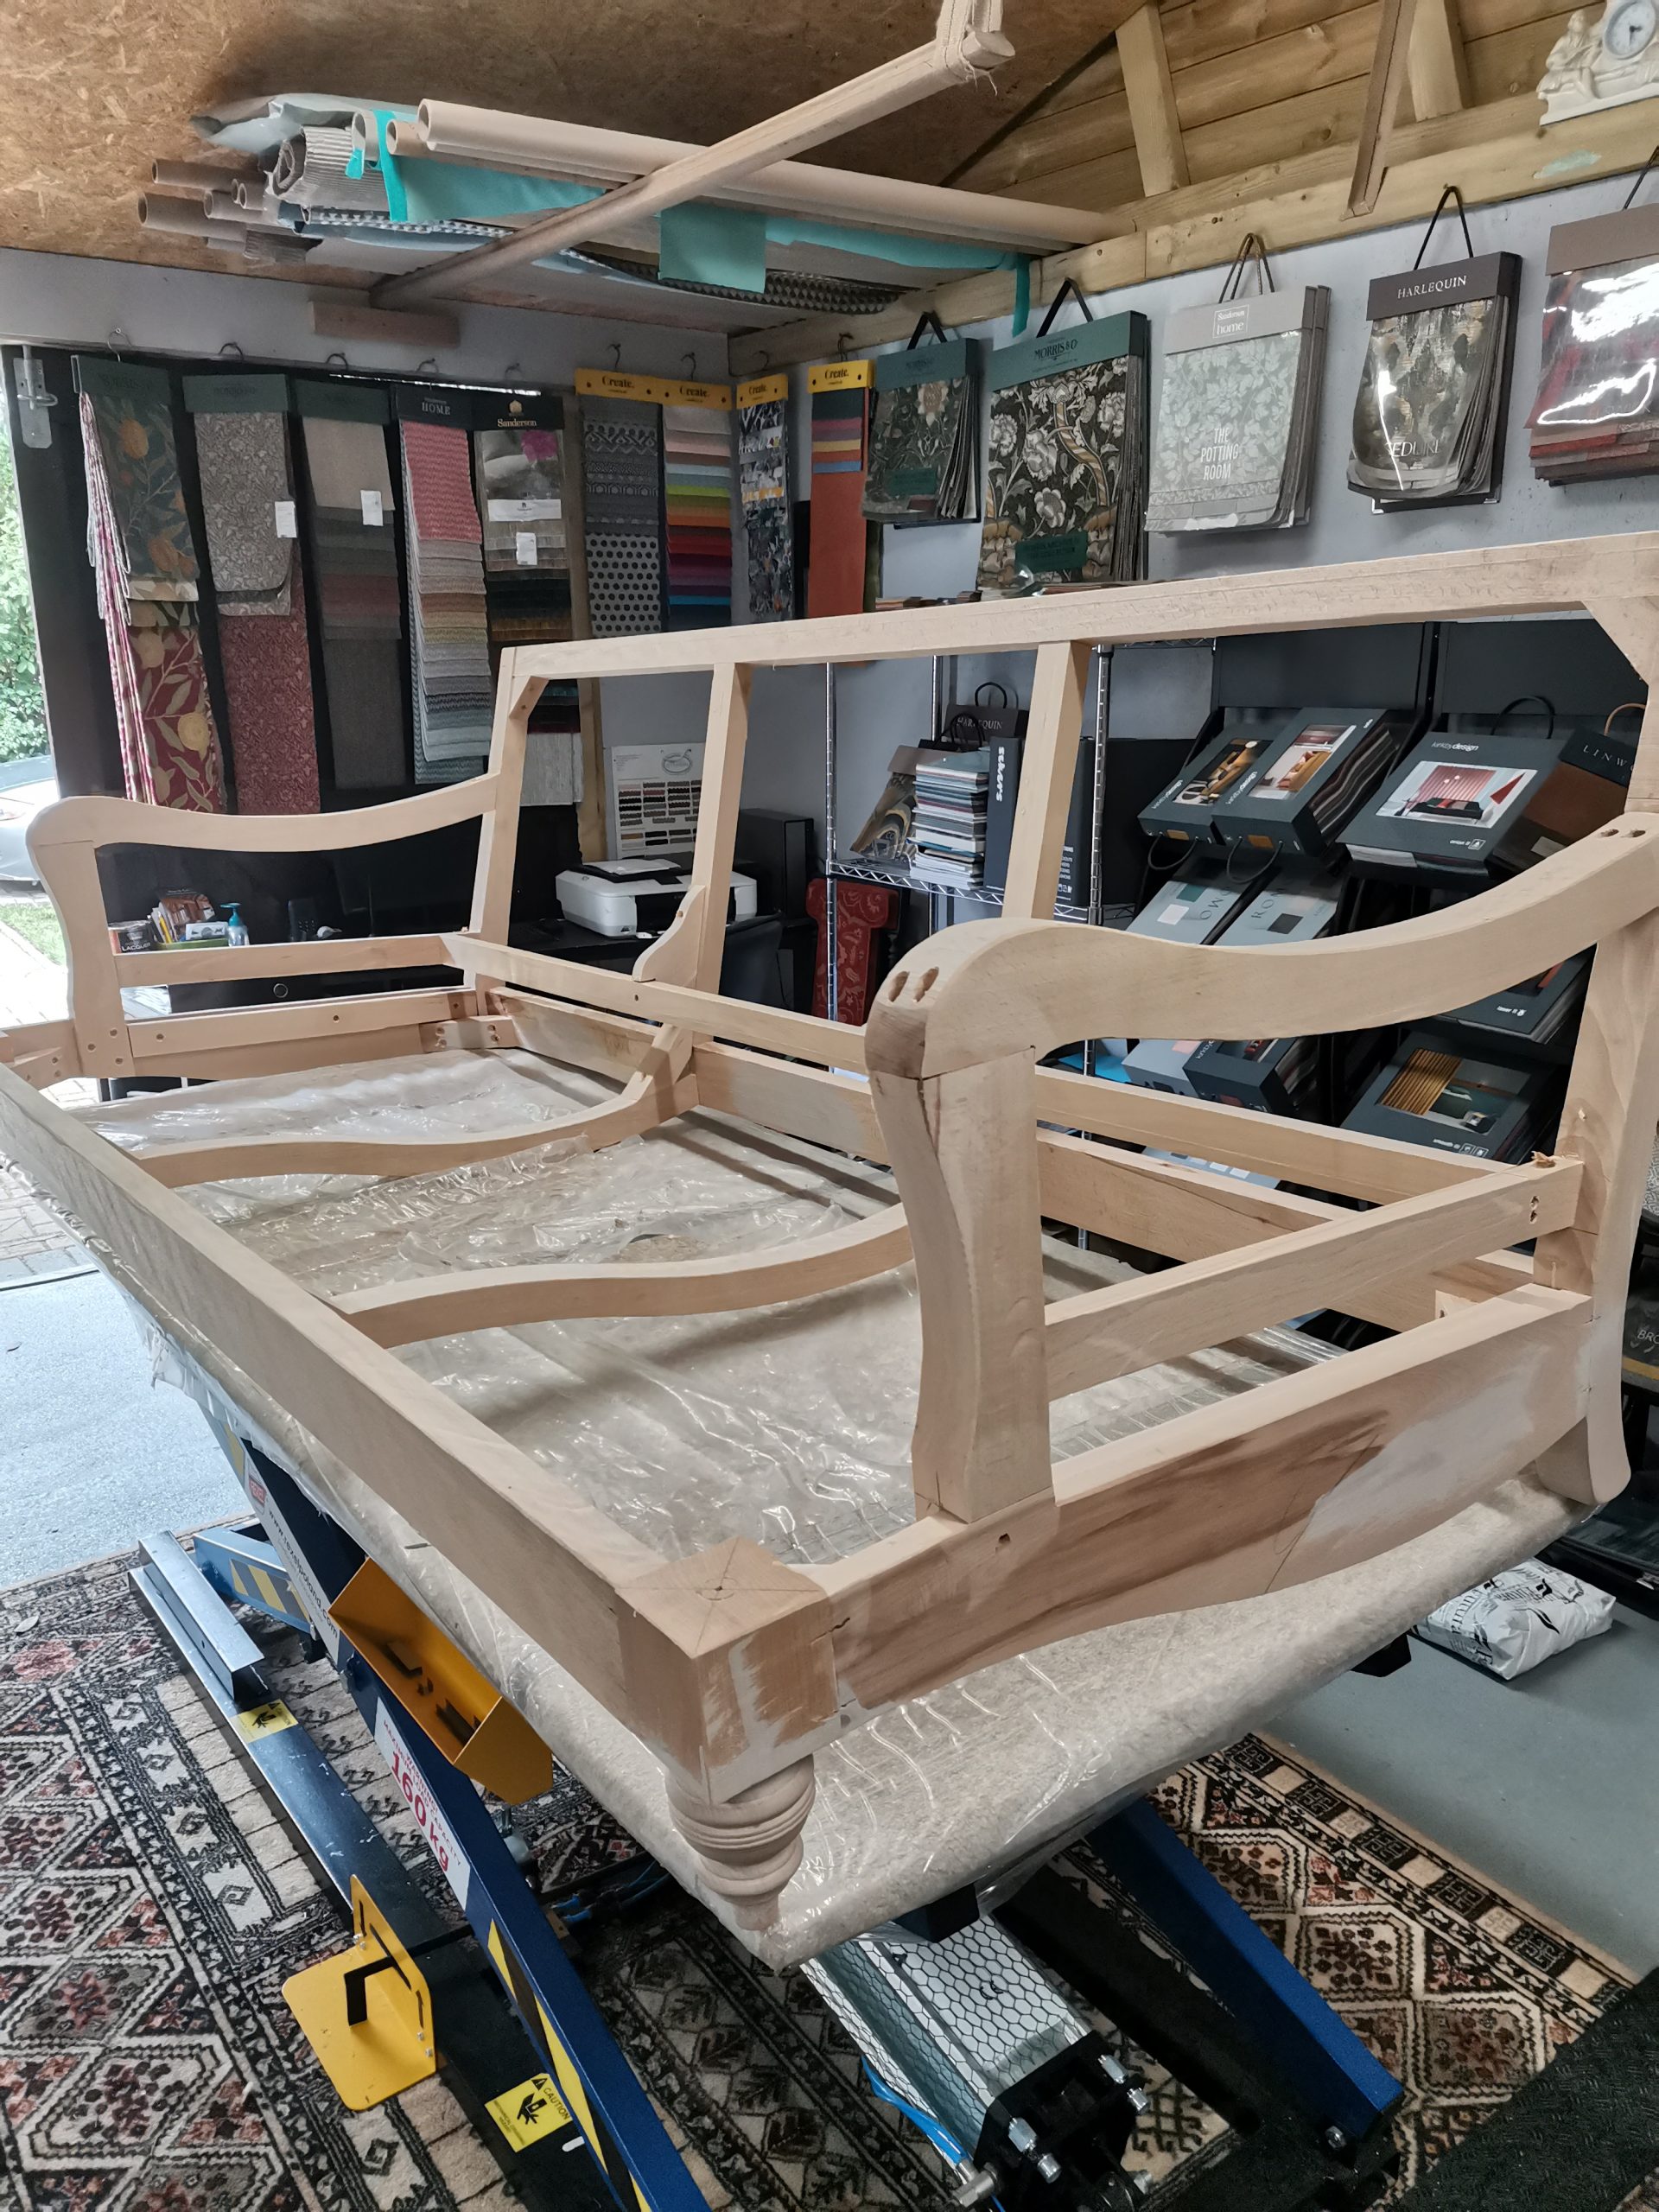 QUALITY HAND MADE FRAMES - Cat and Kiwi Upholstery